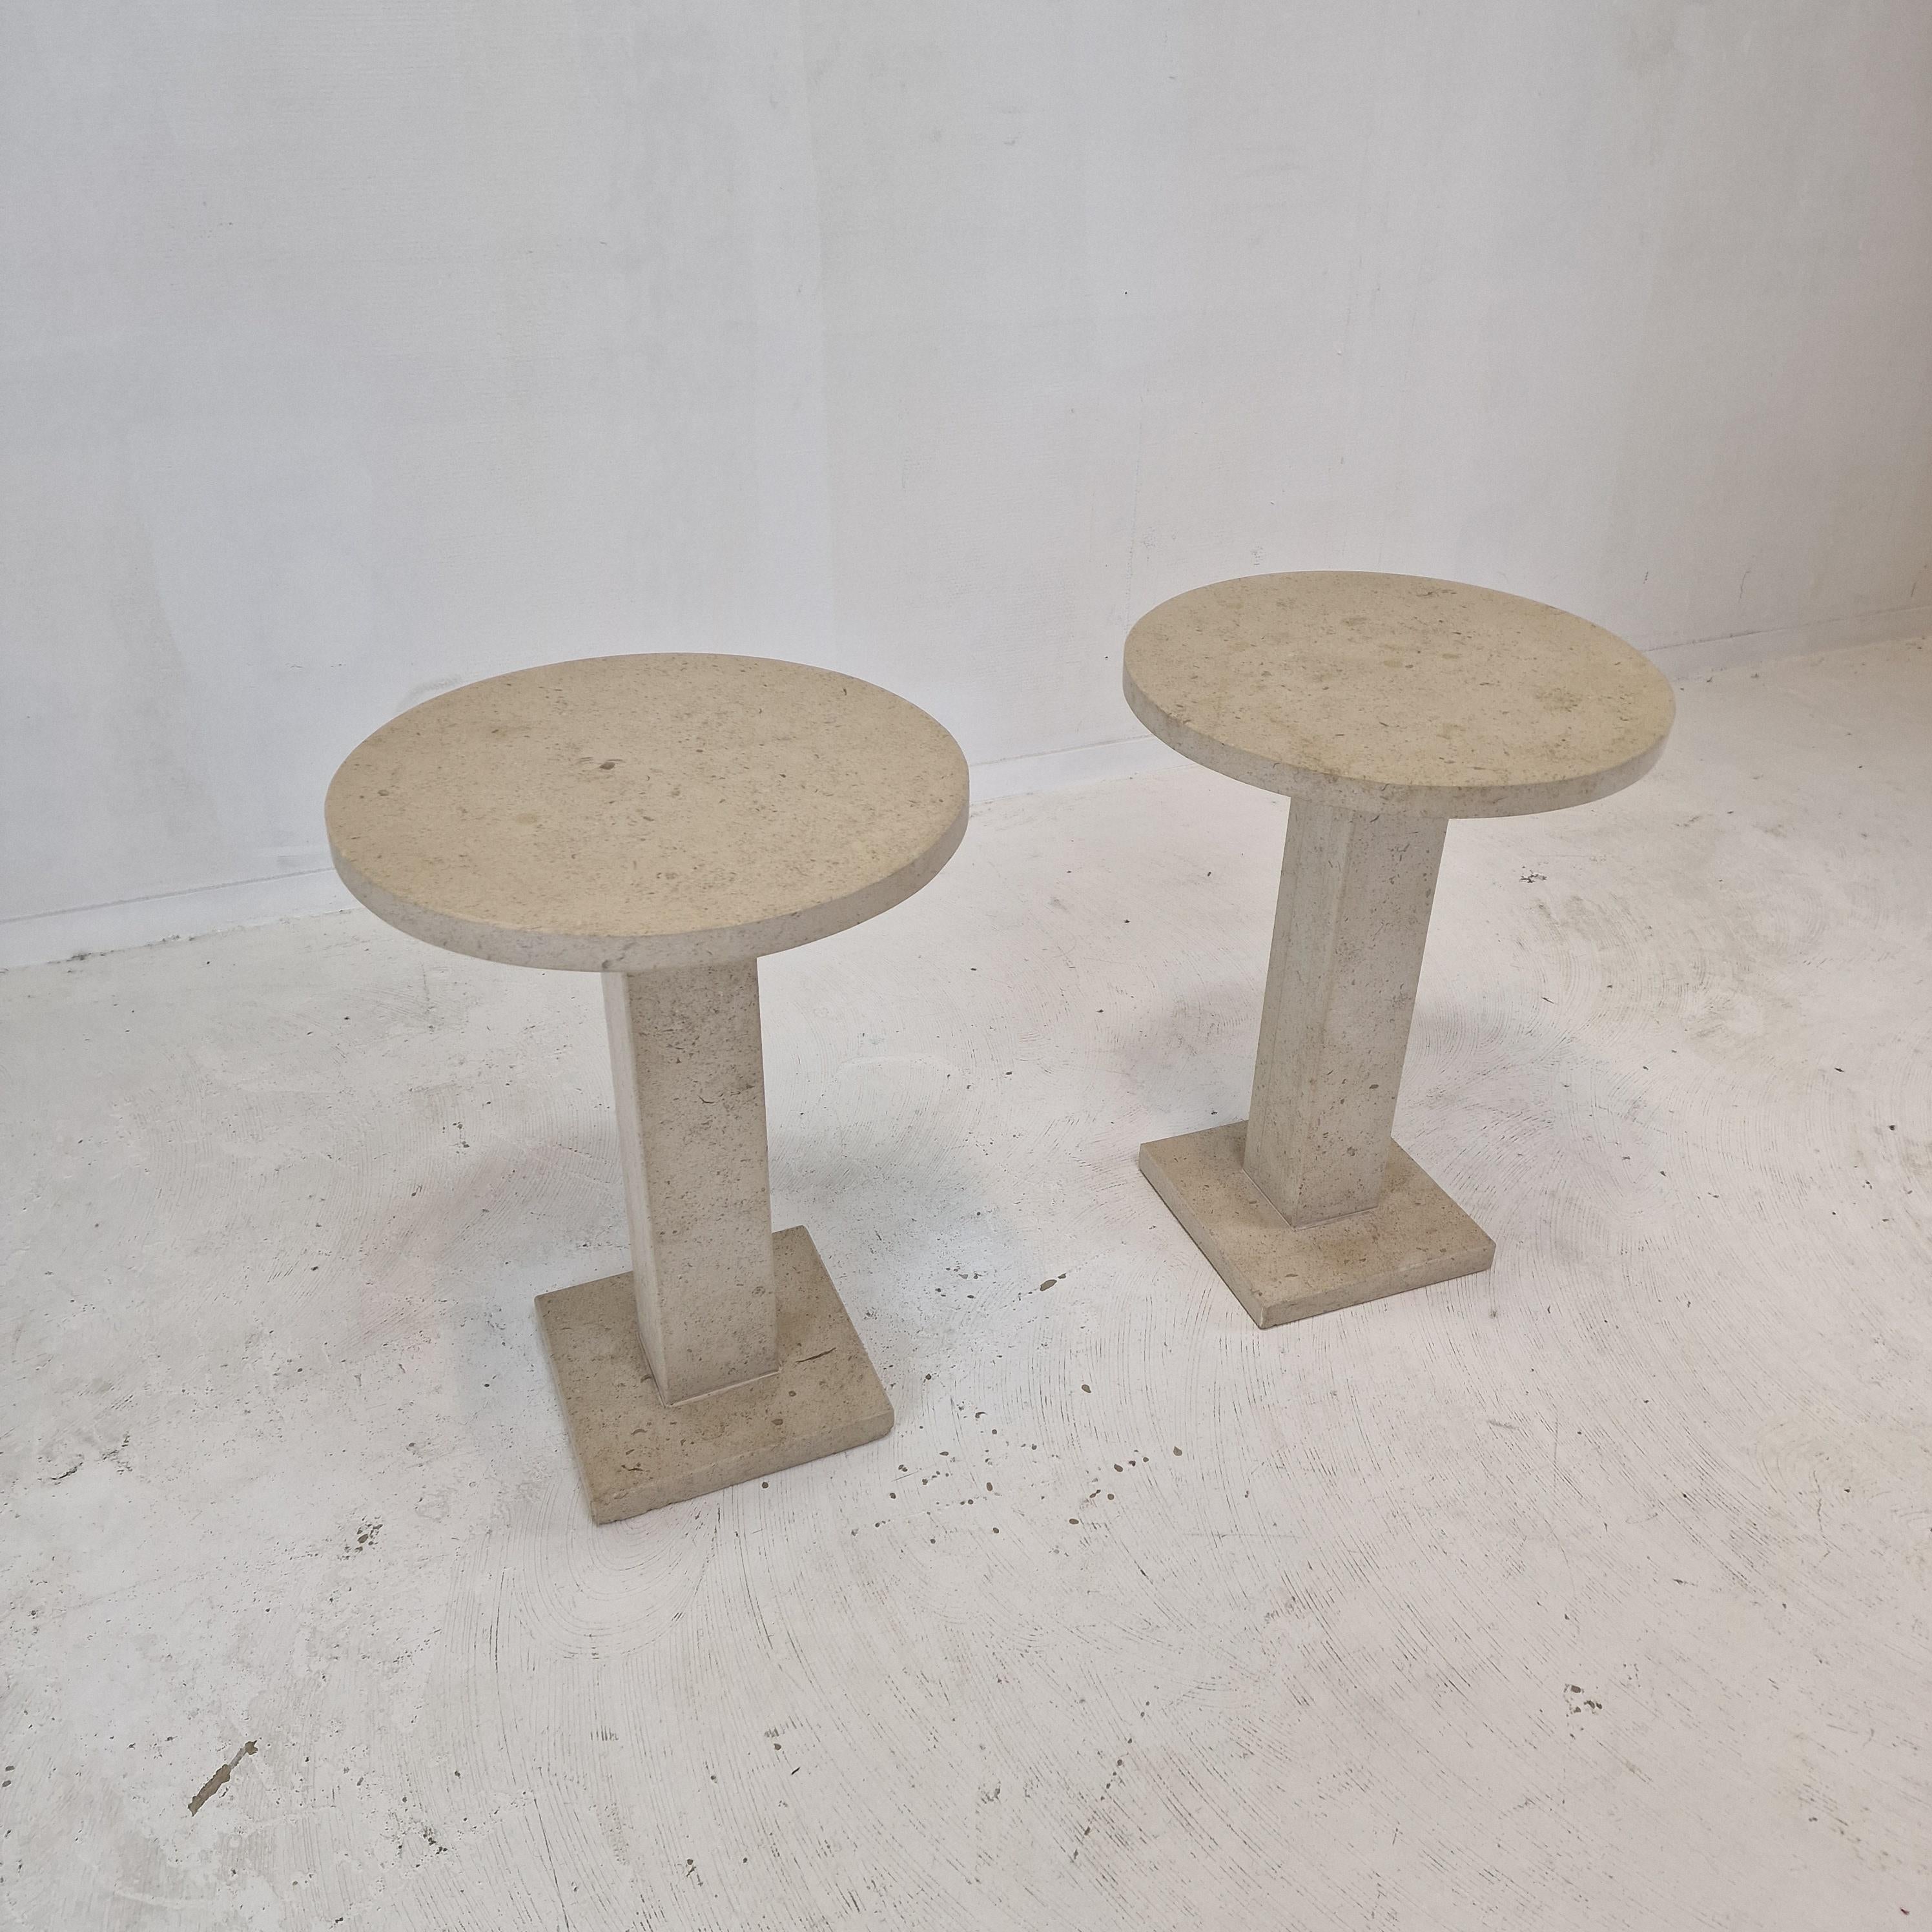 Set of 2 Italian Travertine or Stone Pedestals or Side Tables, 1980s For Sale 1